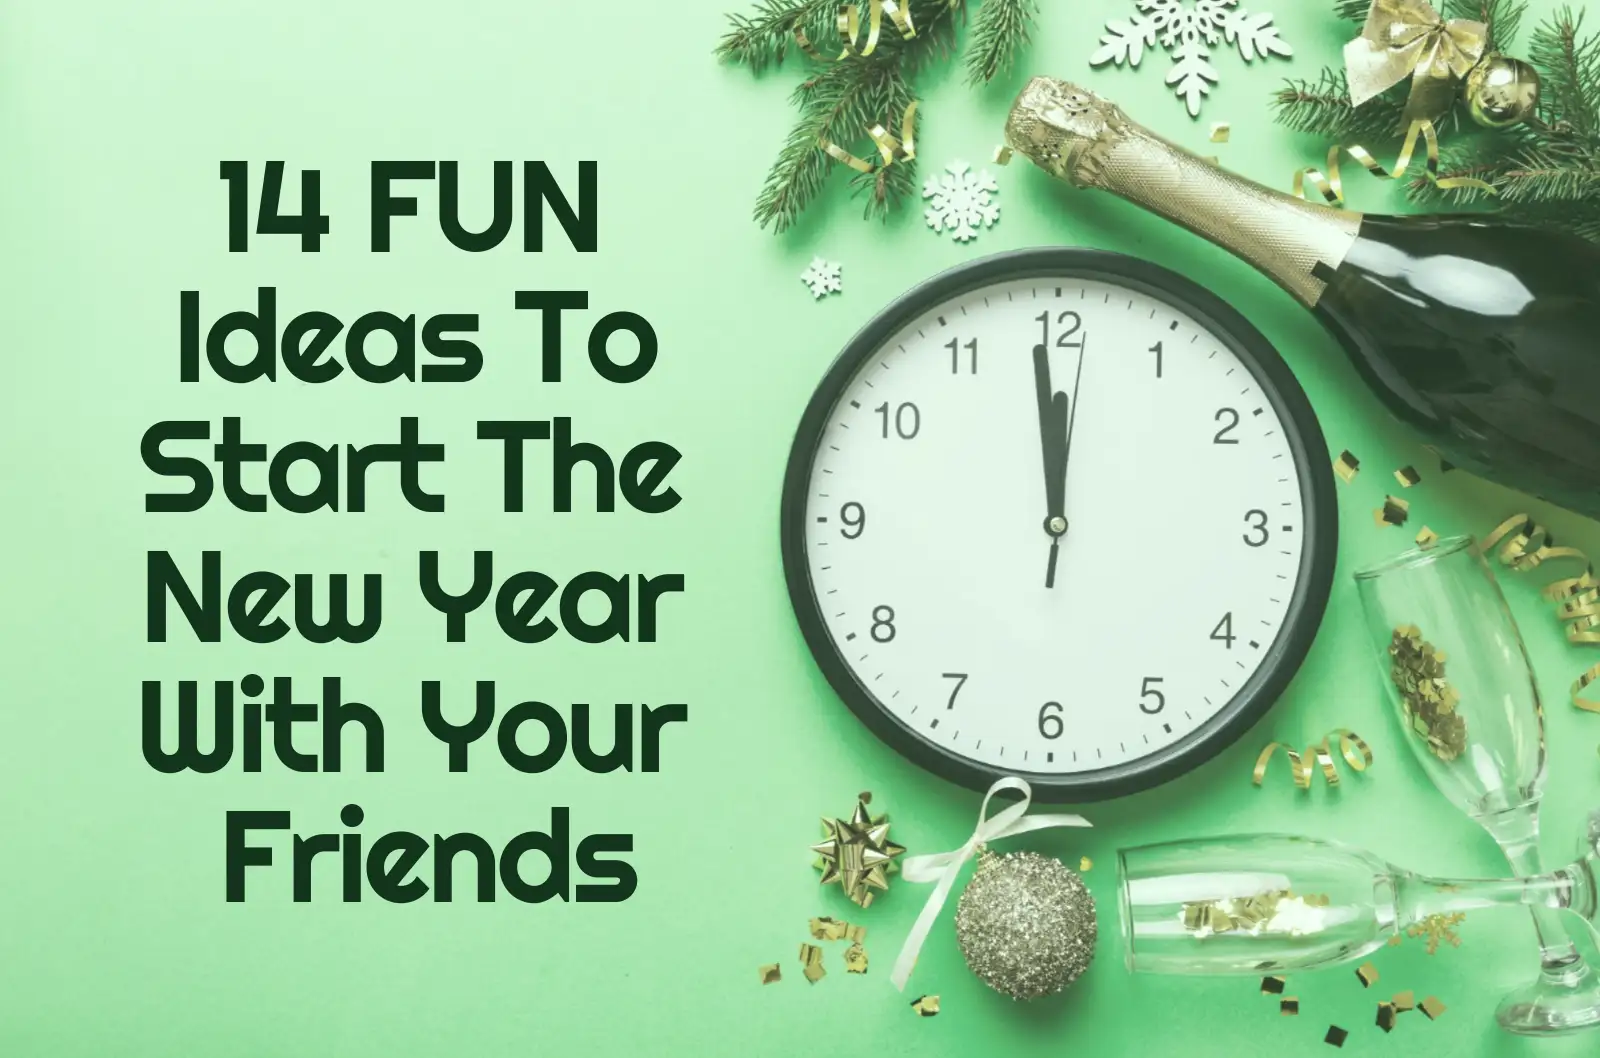 14 FUN Ideas To Start The New Year With Your Friends banner.webp